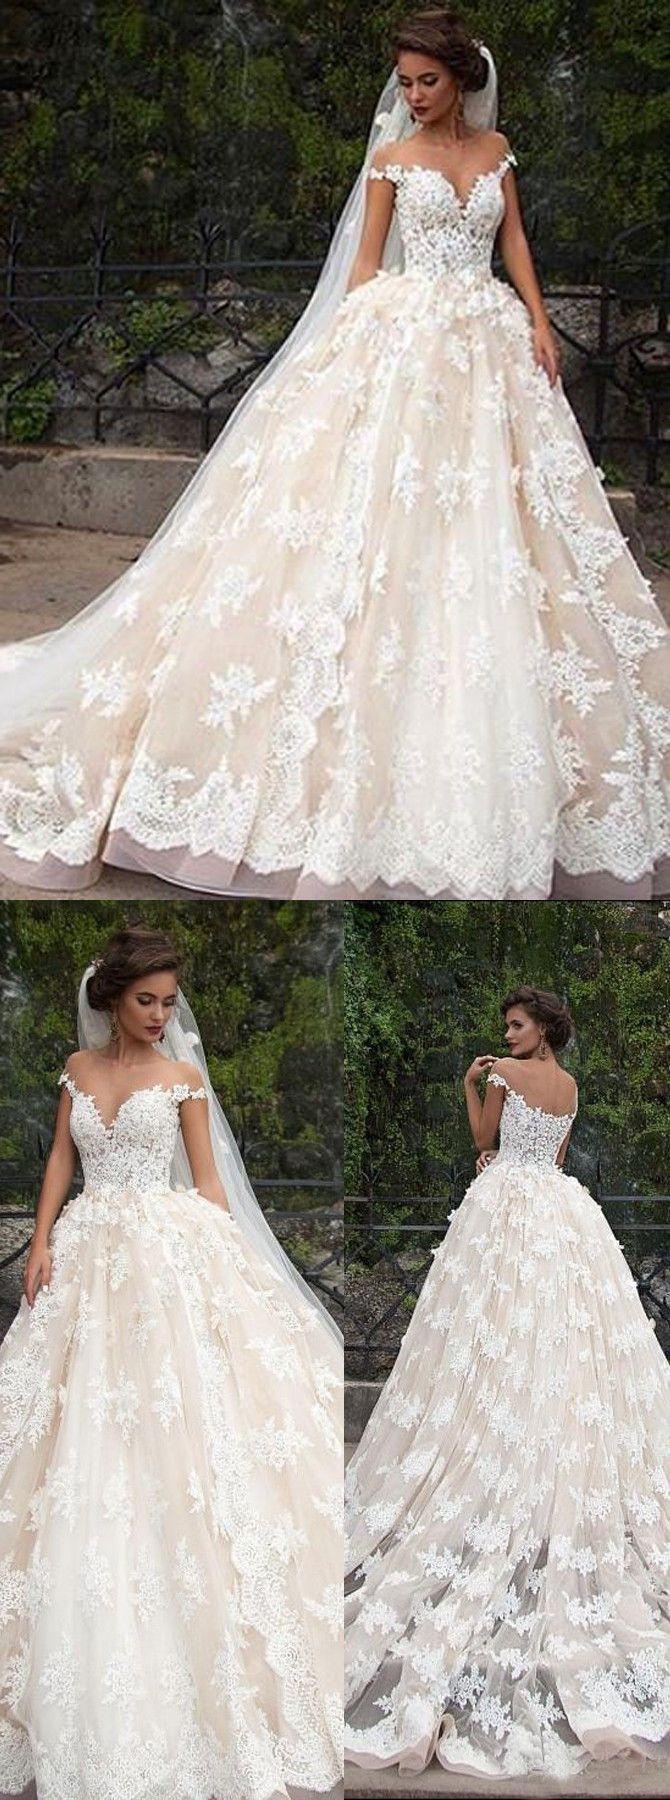 Mariage - Glamorous Jewel Cap Sleeves Court Train Wedding Dress With Lace Top